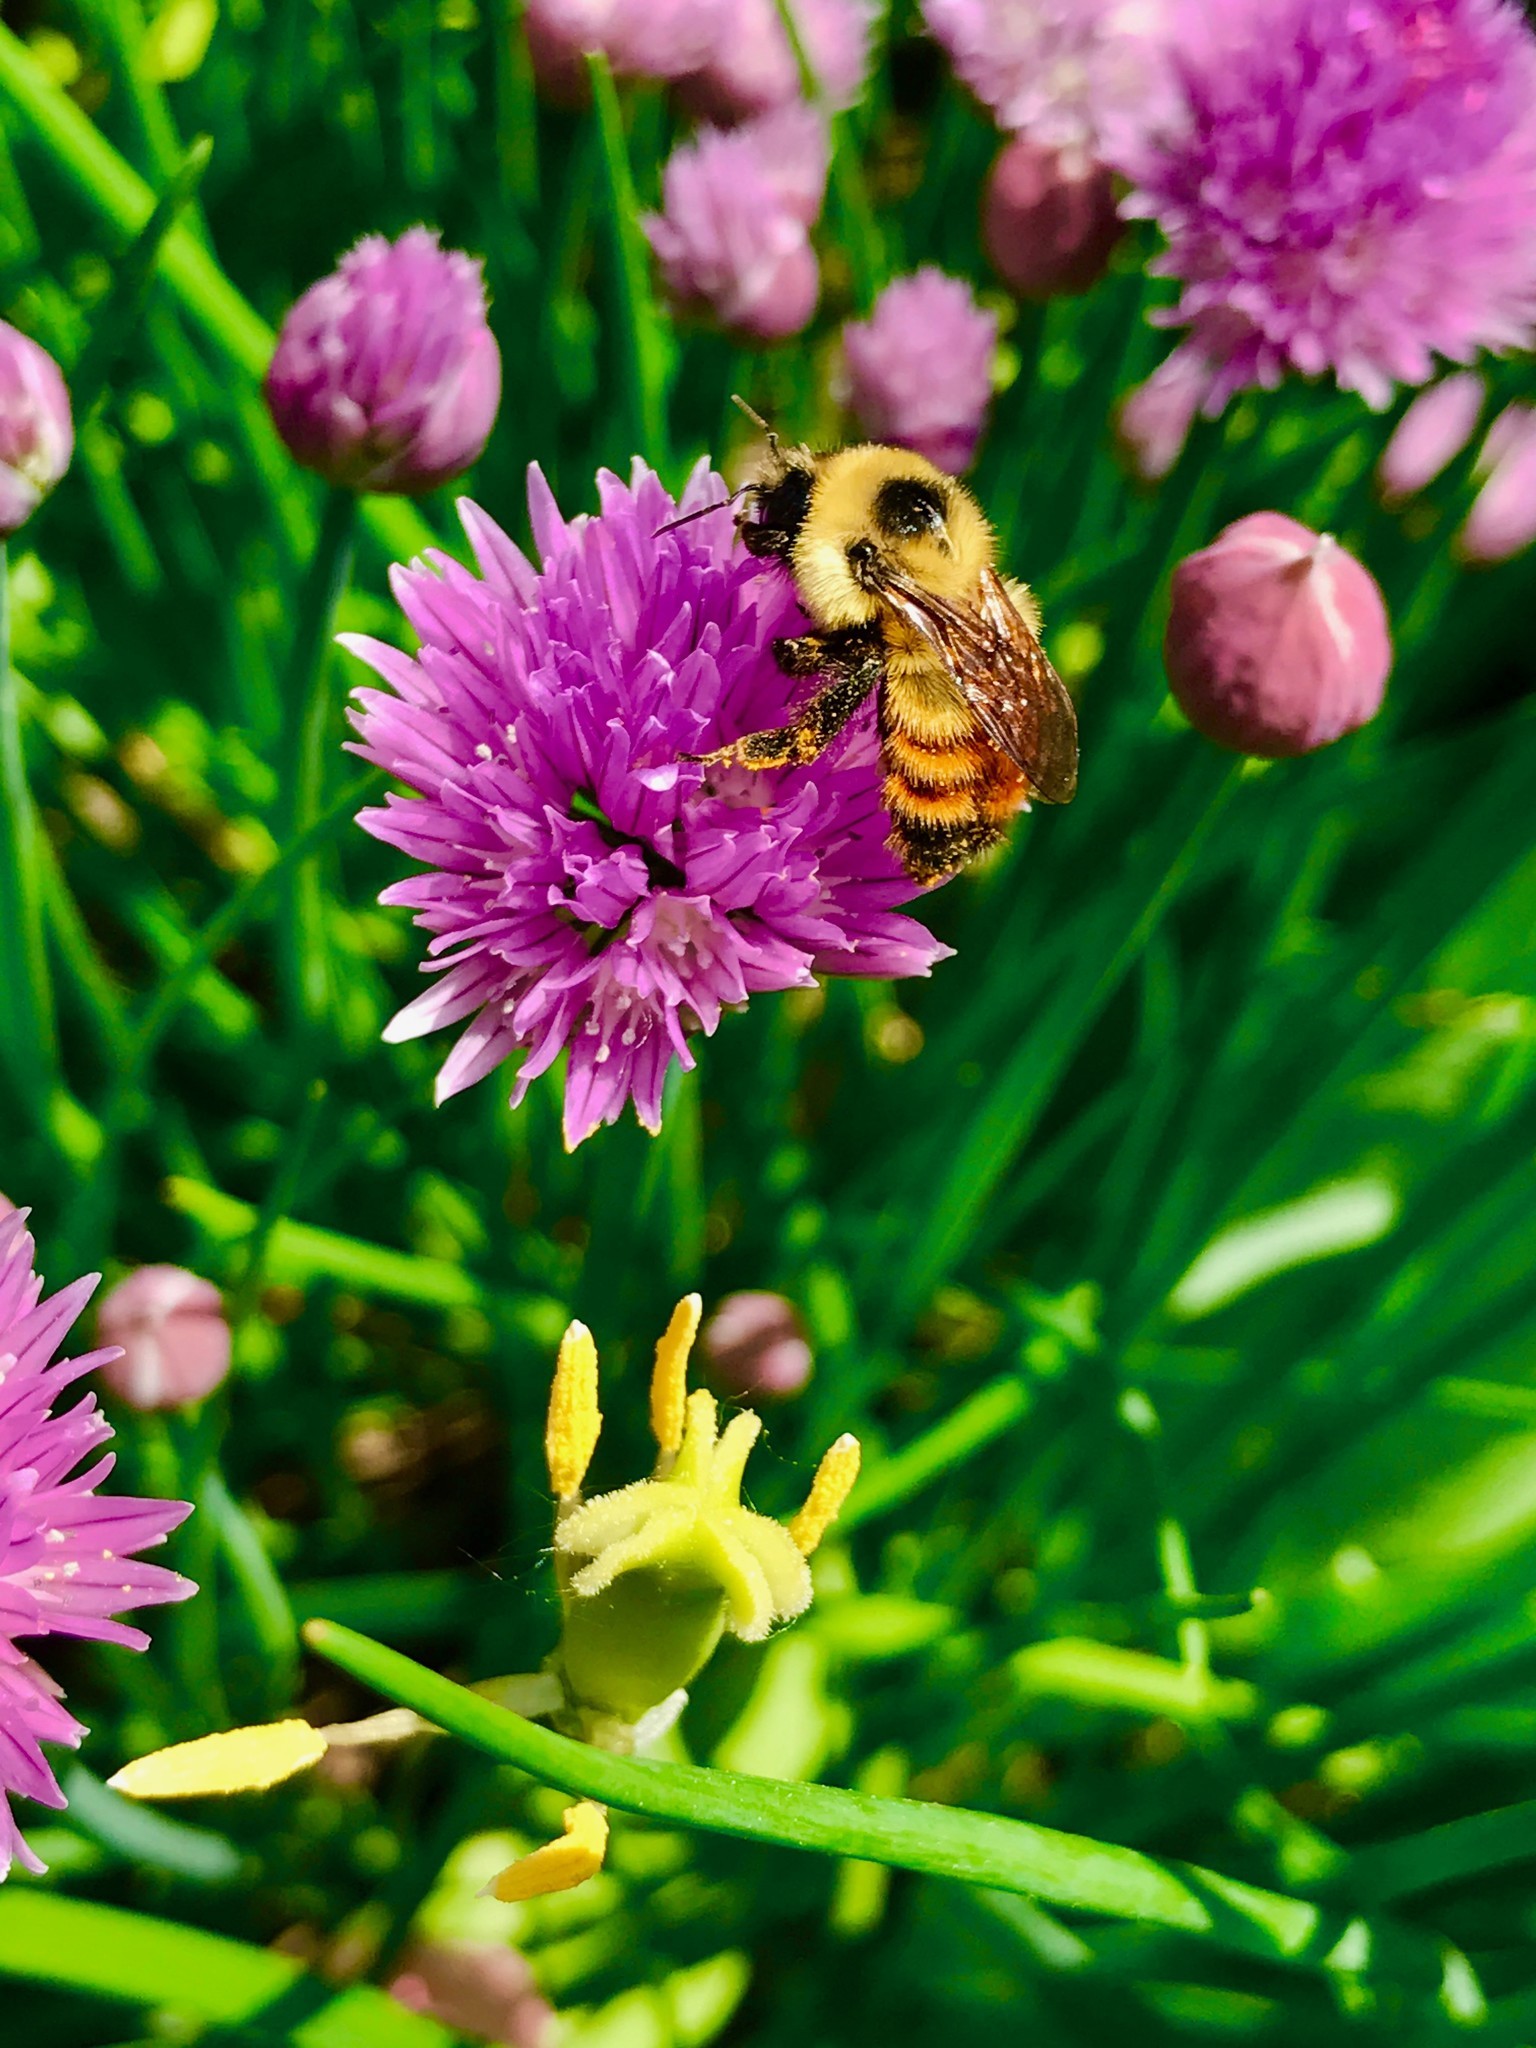 A red-belted bumblebee covered in pollen visits a chive flower in Canada.